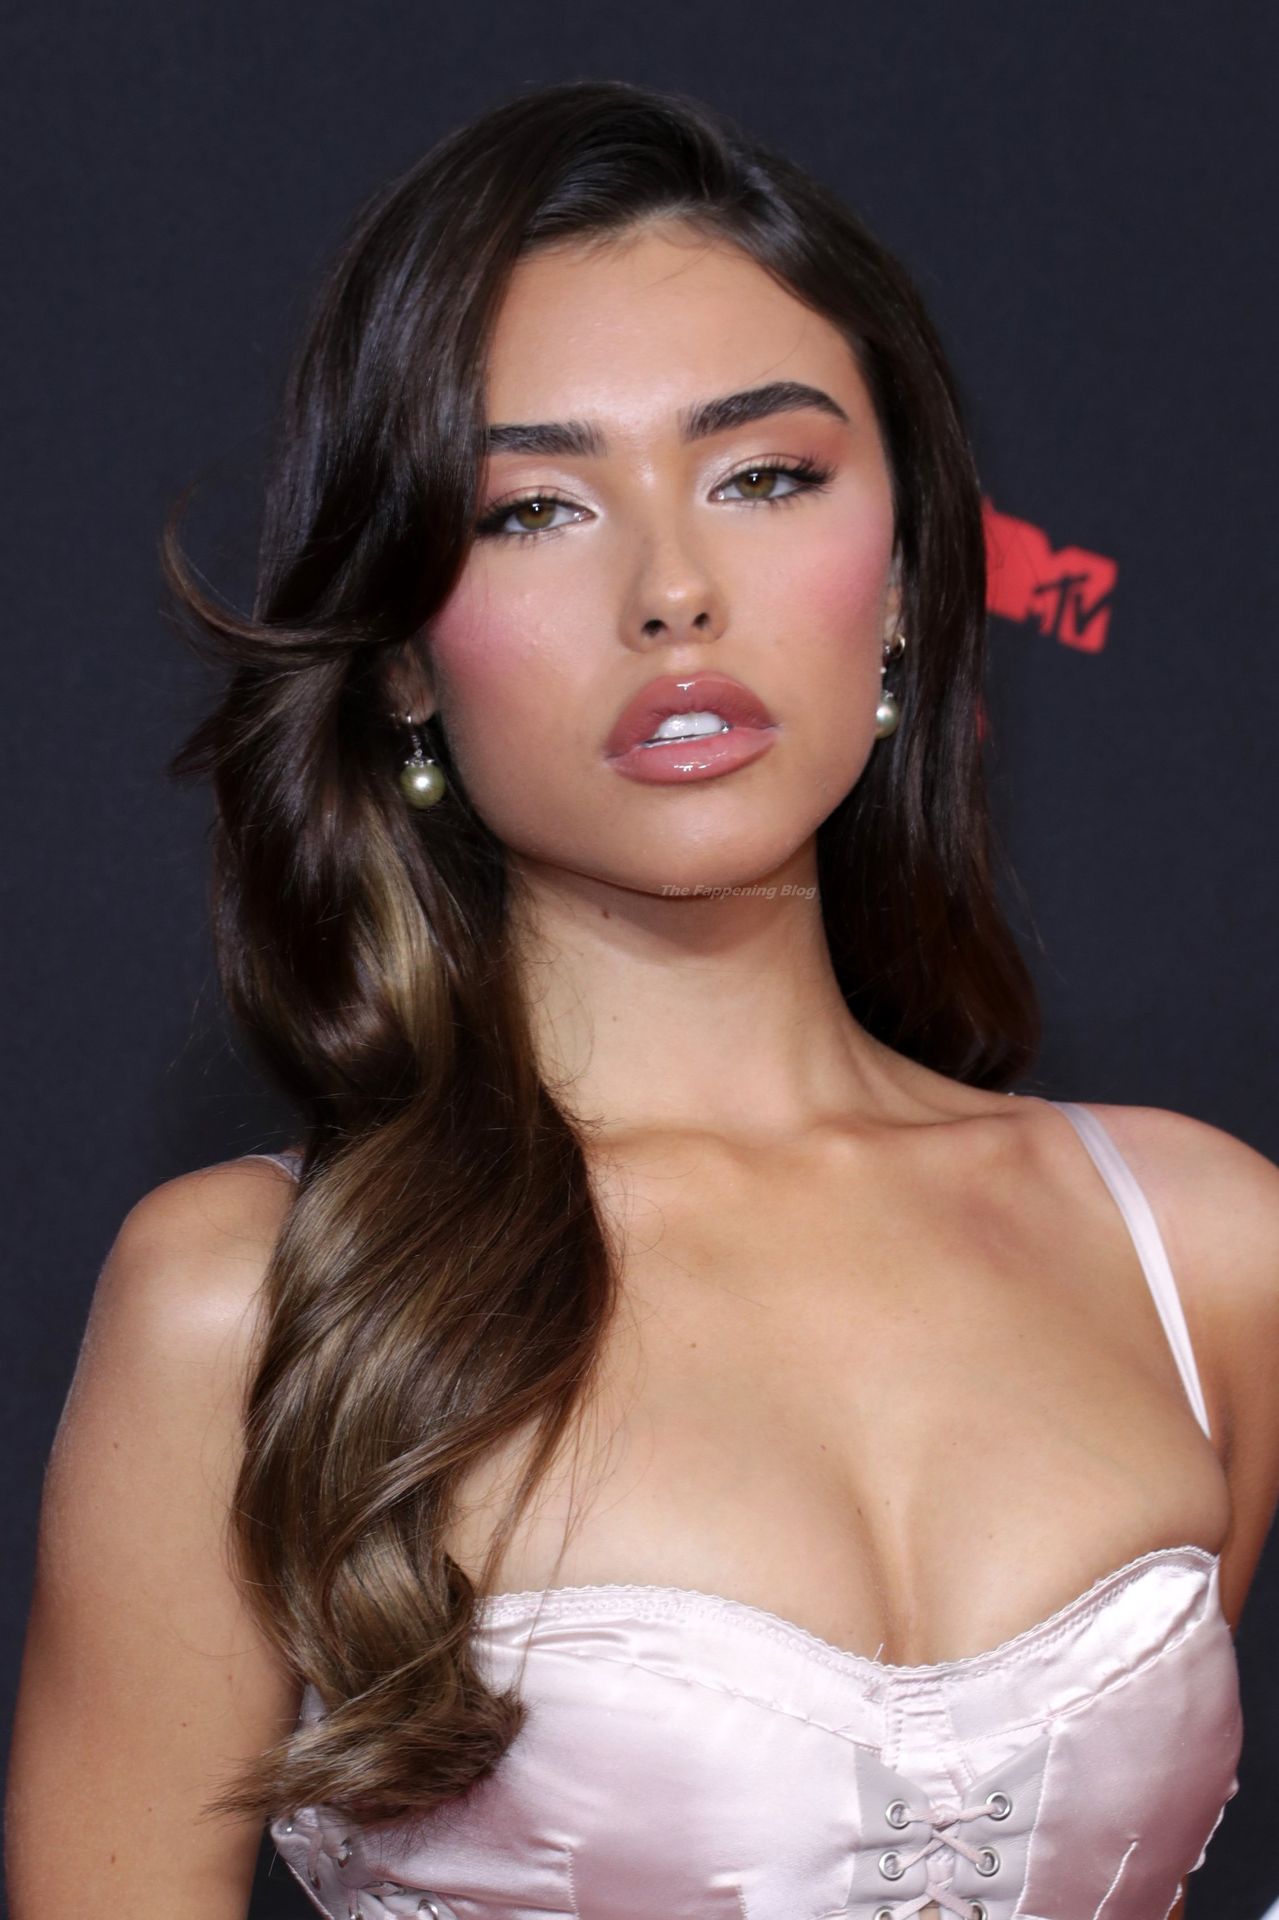 Madison Beer Poses on the Red Carpet at the MTV Video Music Awards (49 Photos)